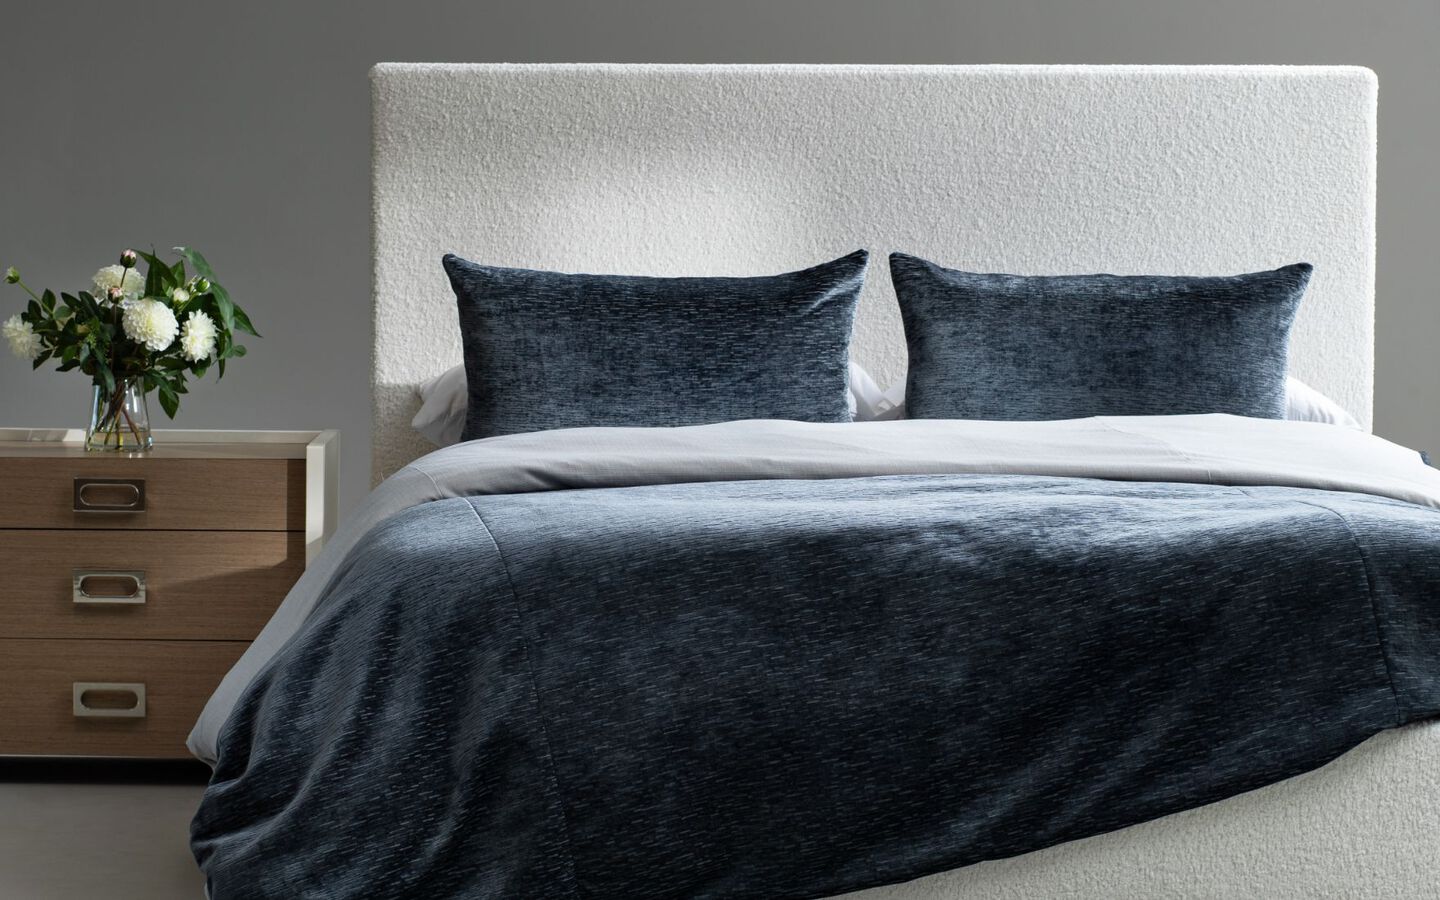 Bedroom with bed with grey upholstered bedframe and navy velvet comforter and a wooden nightstand on the side